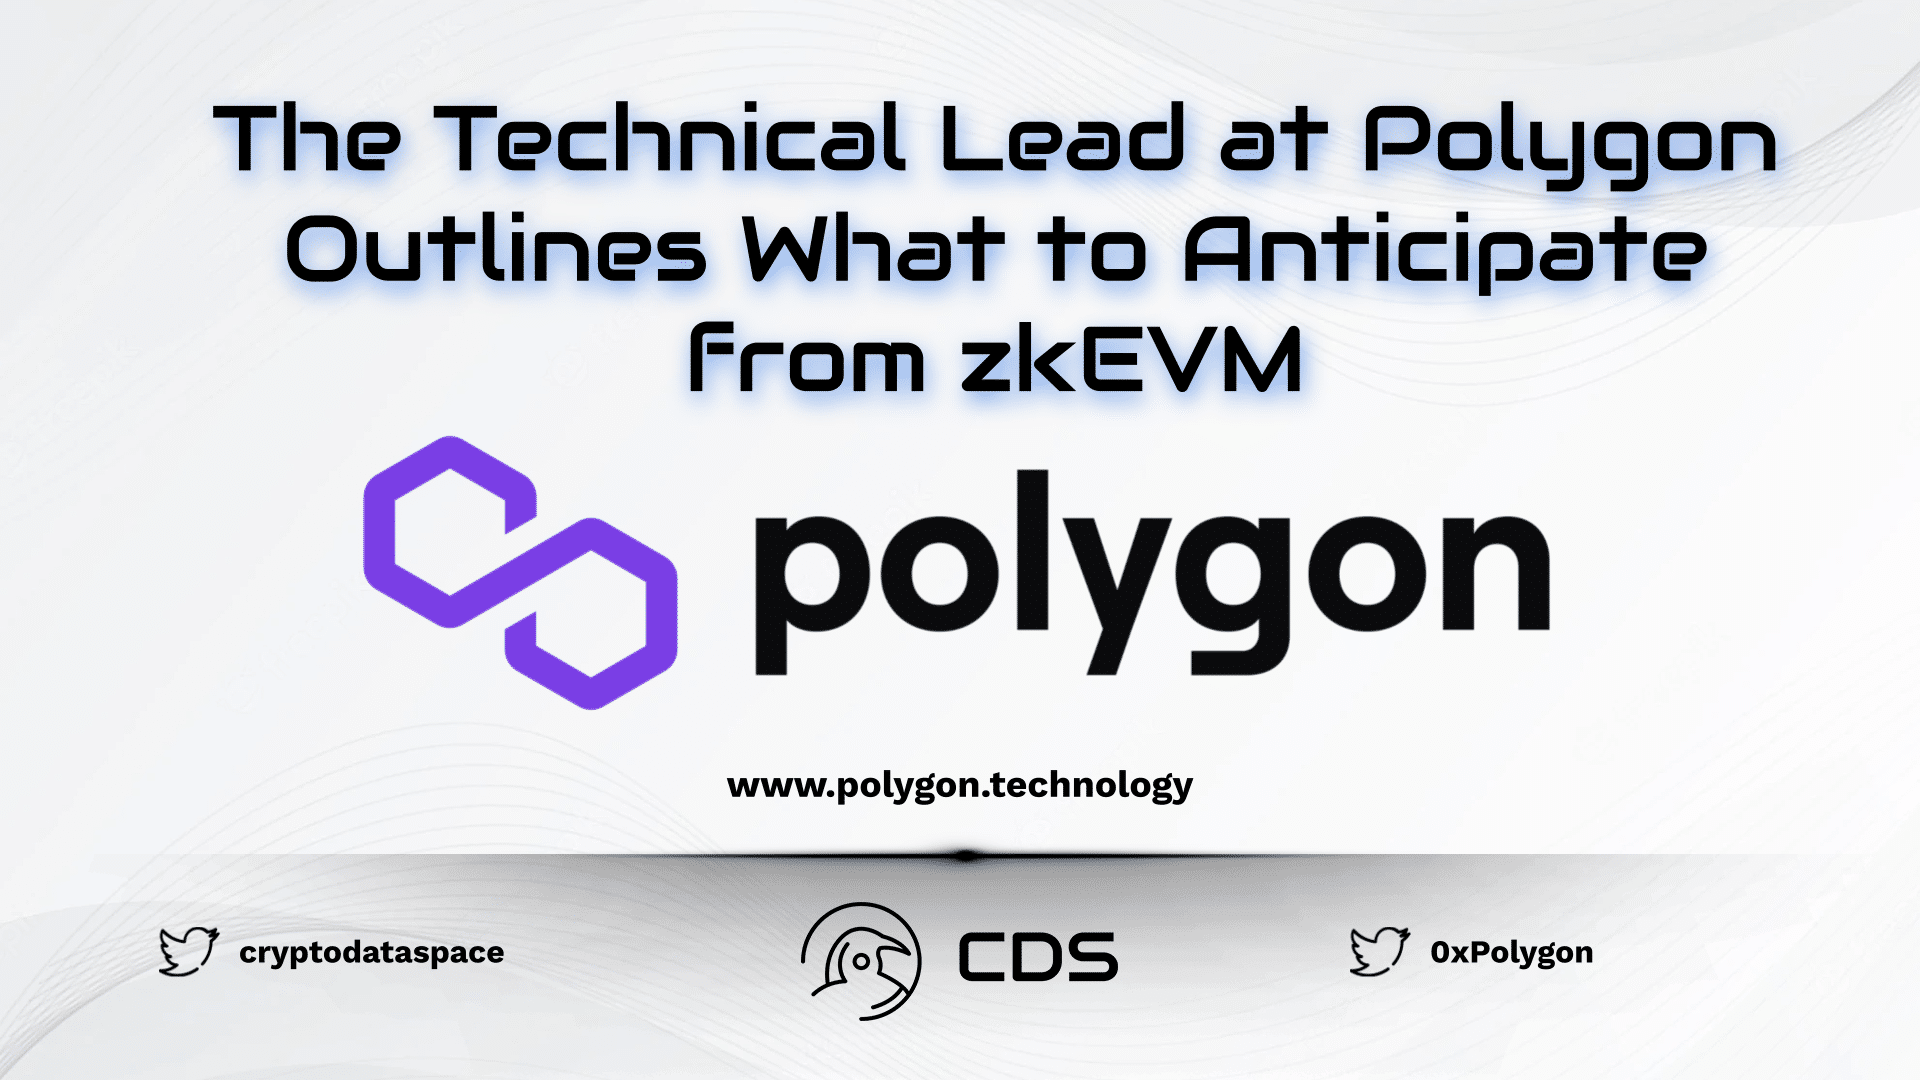 The Technical Lead at Polygon Outlines What to Anticipate from zkEVM